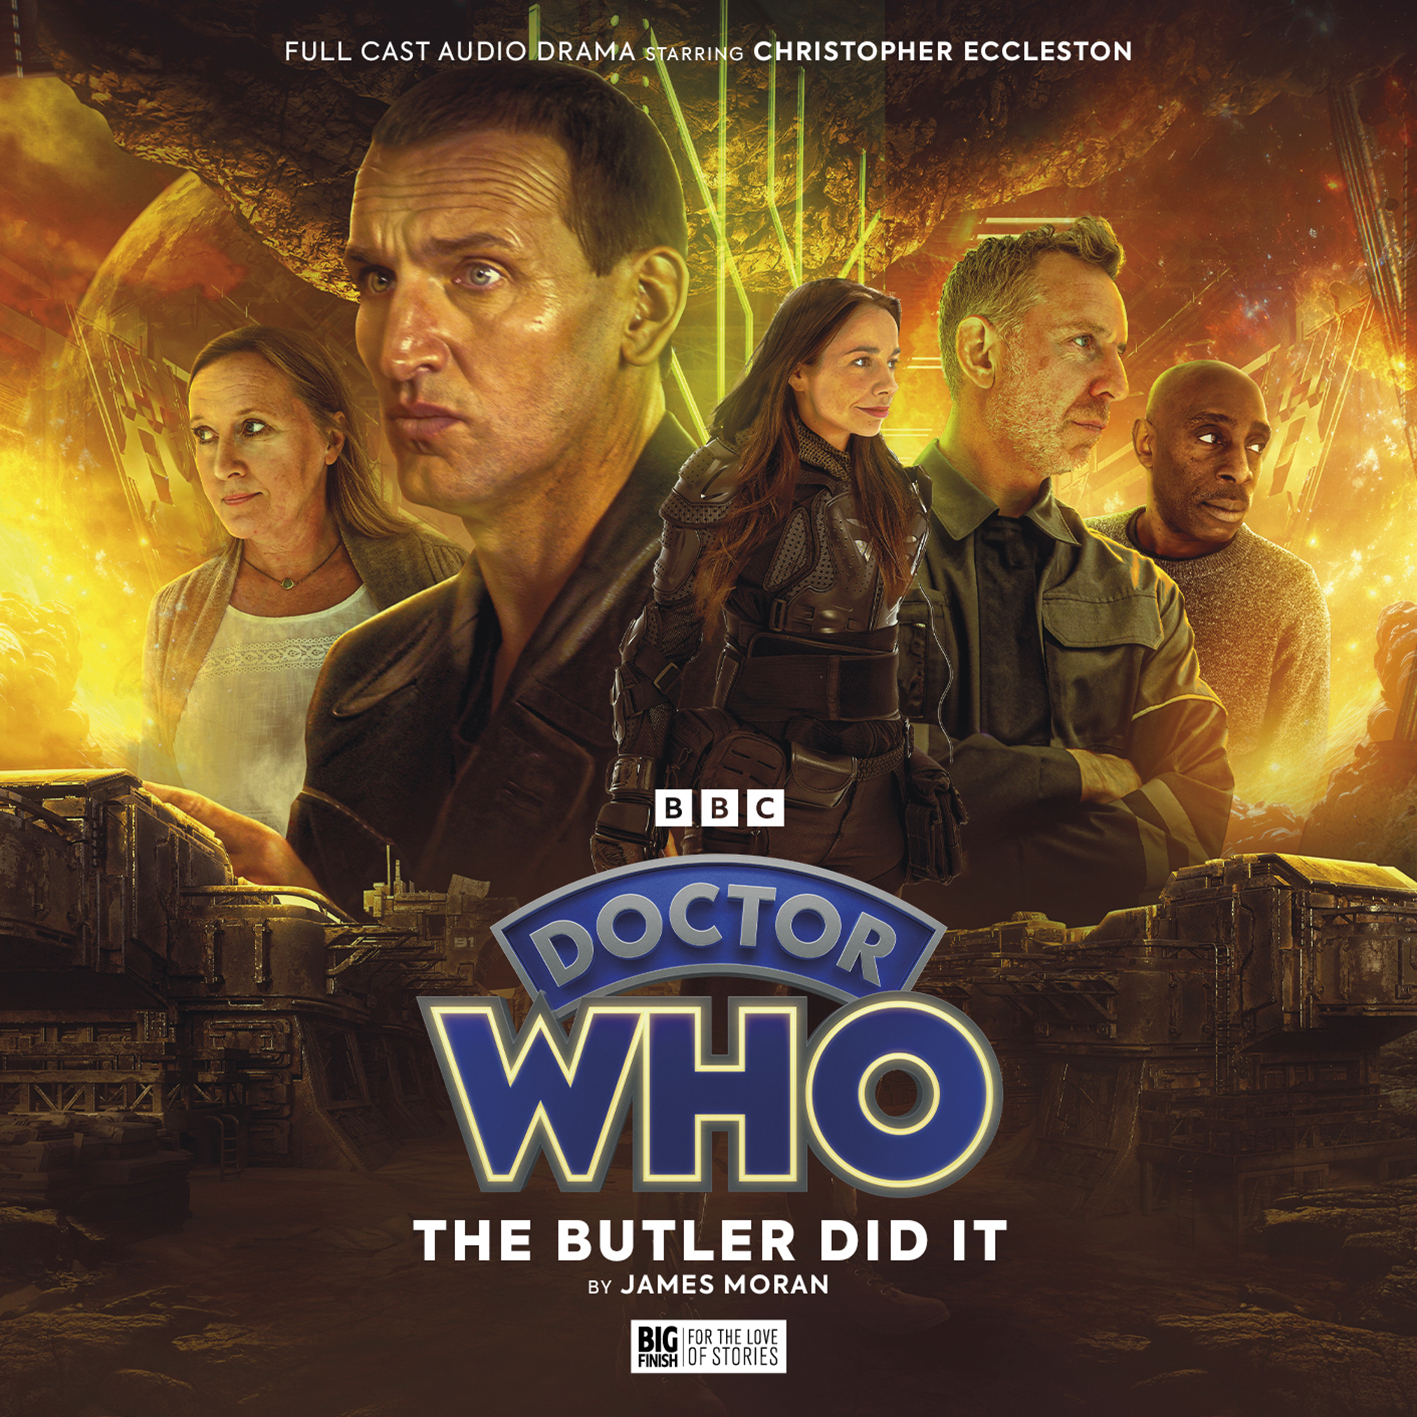 The Ninth Doctor Adventures 3.2 Travel in Hope - The Butler Did It cover art